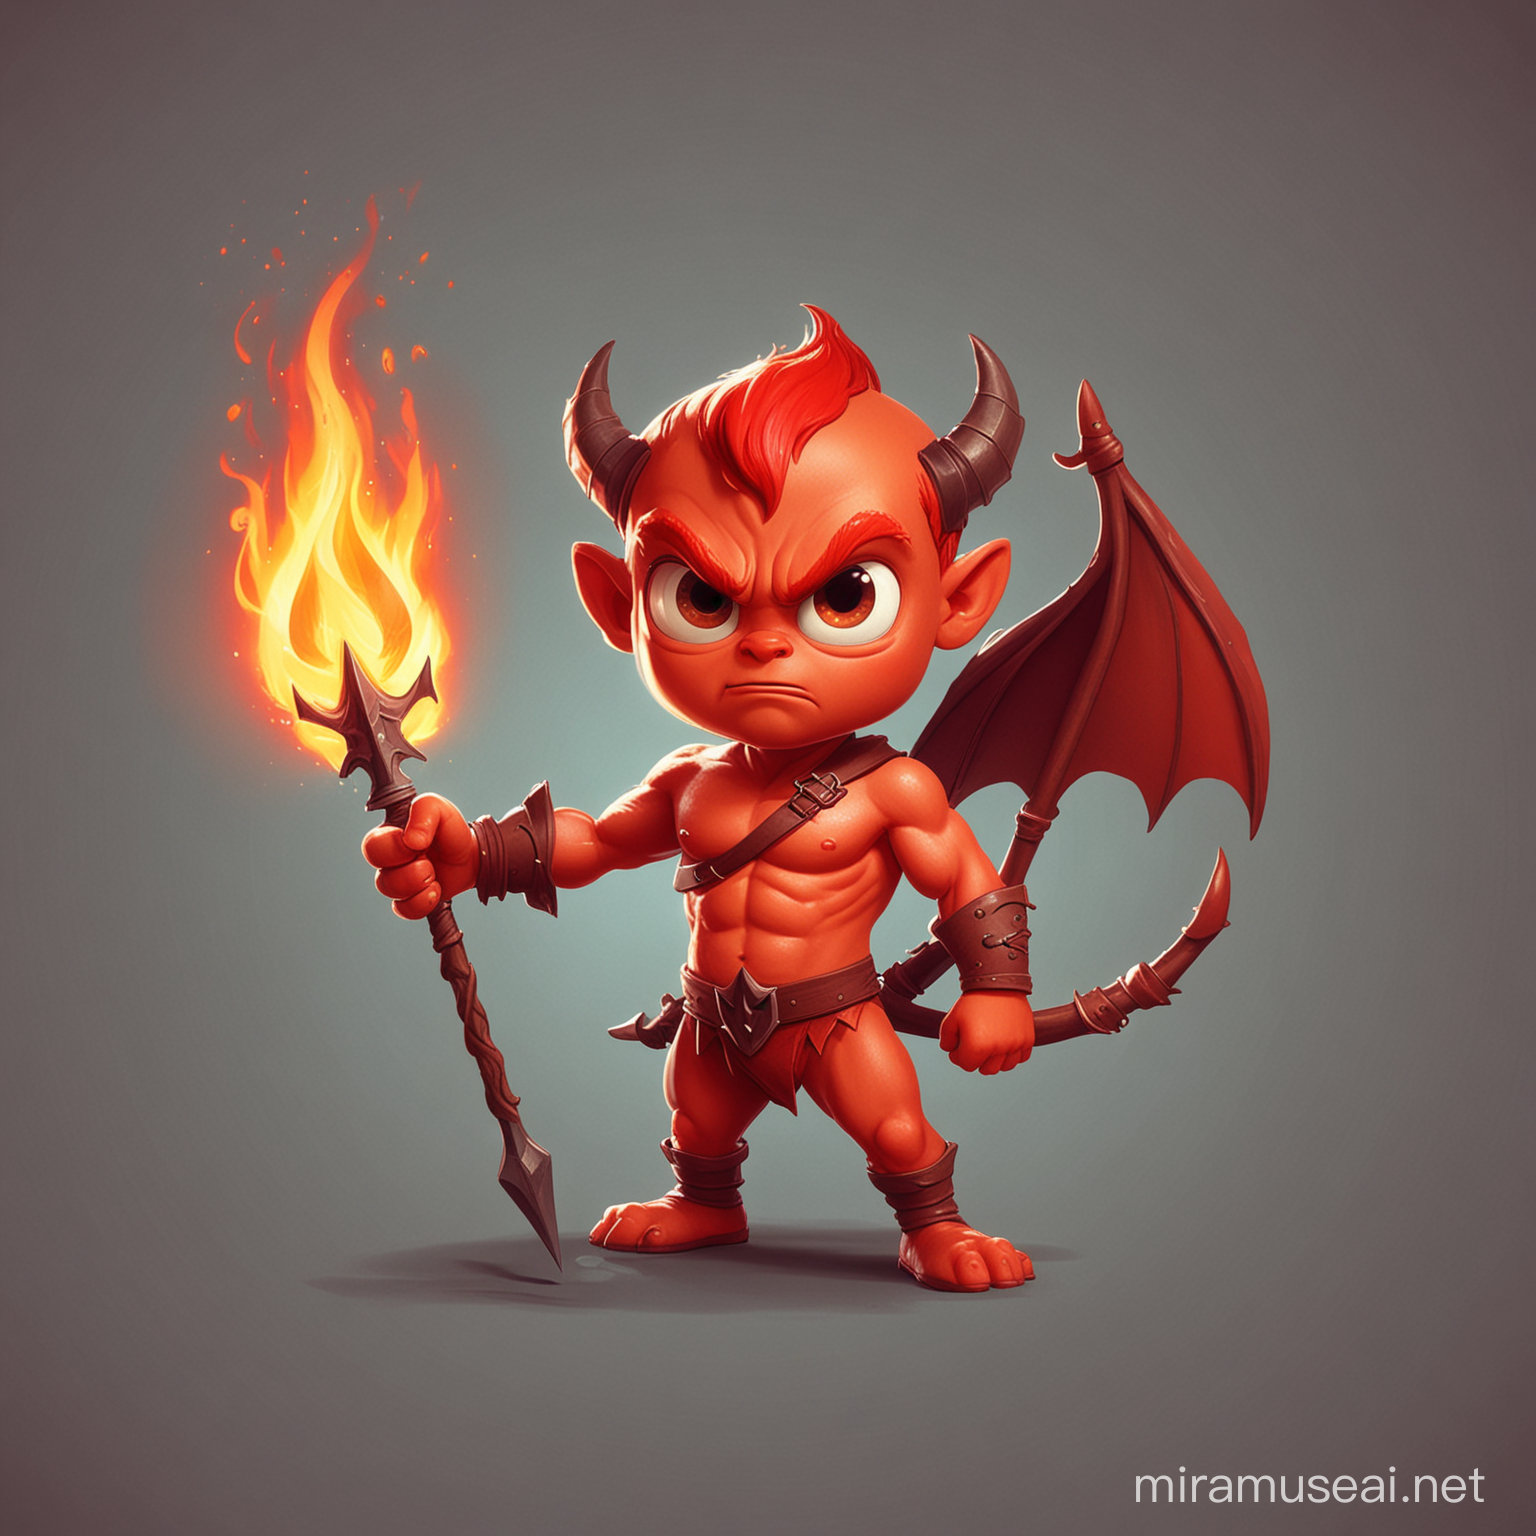 A little red devil with a trident in his hands breathes fire. Cartoon style.